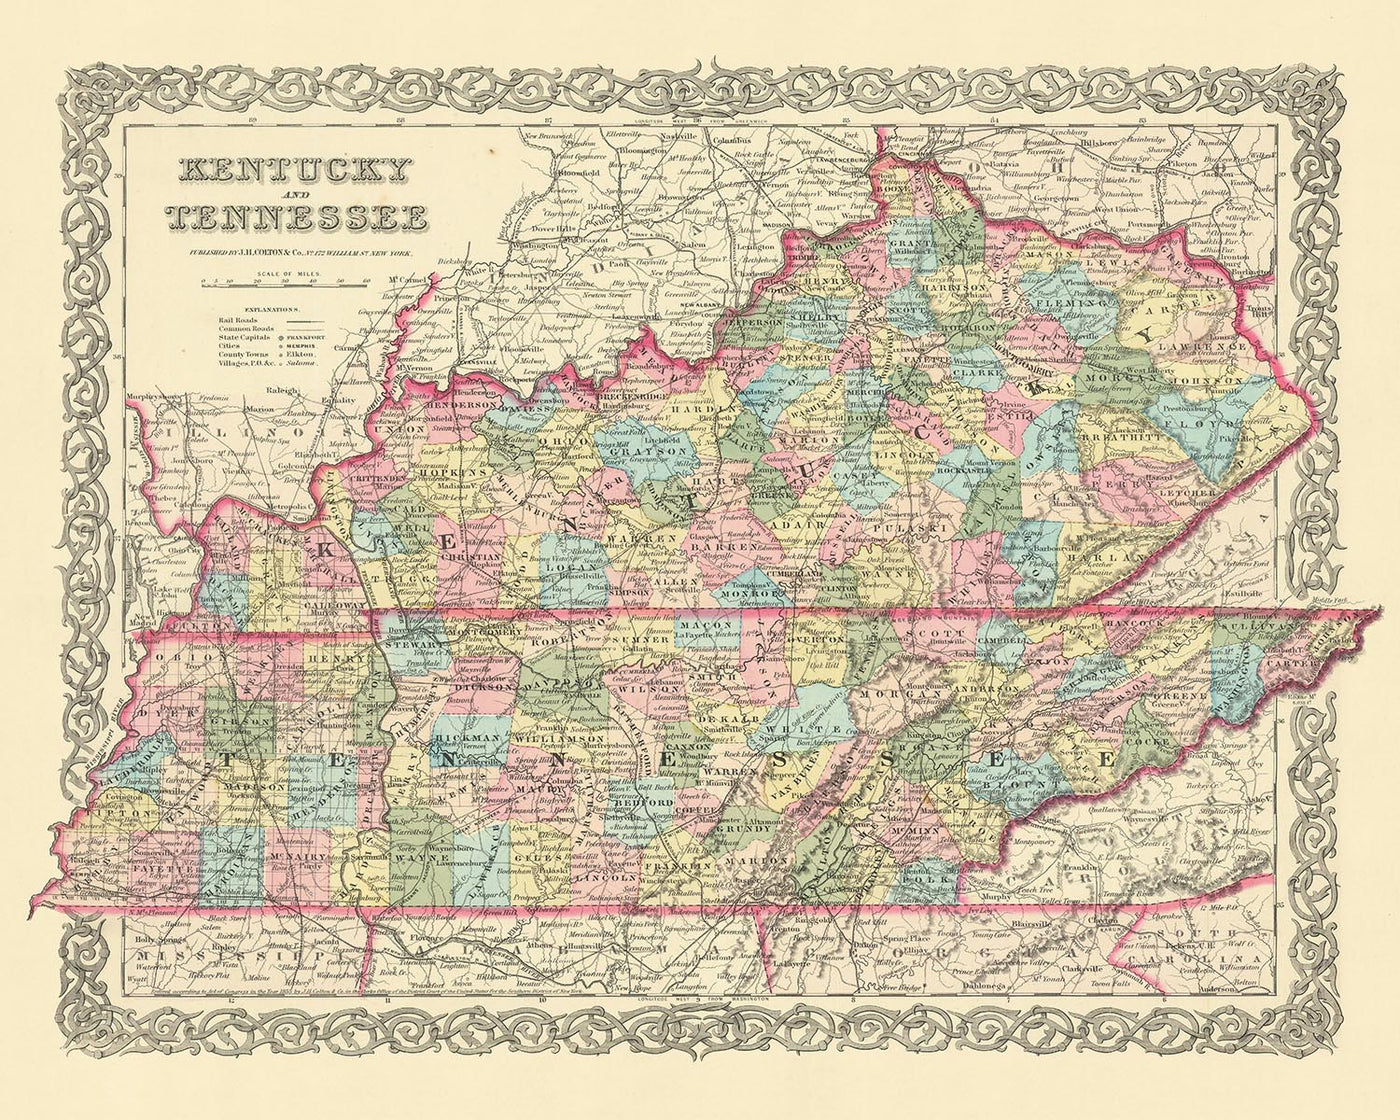 Old map of Kentucky by J. H. Colton, 1855: Louisville, Lexington, Frankfort, Covington, and Bowling Green